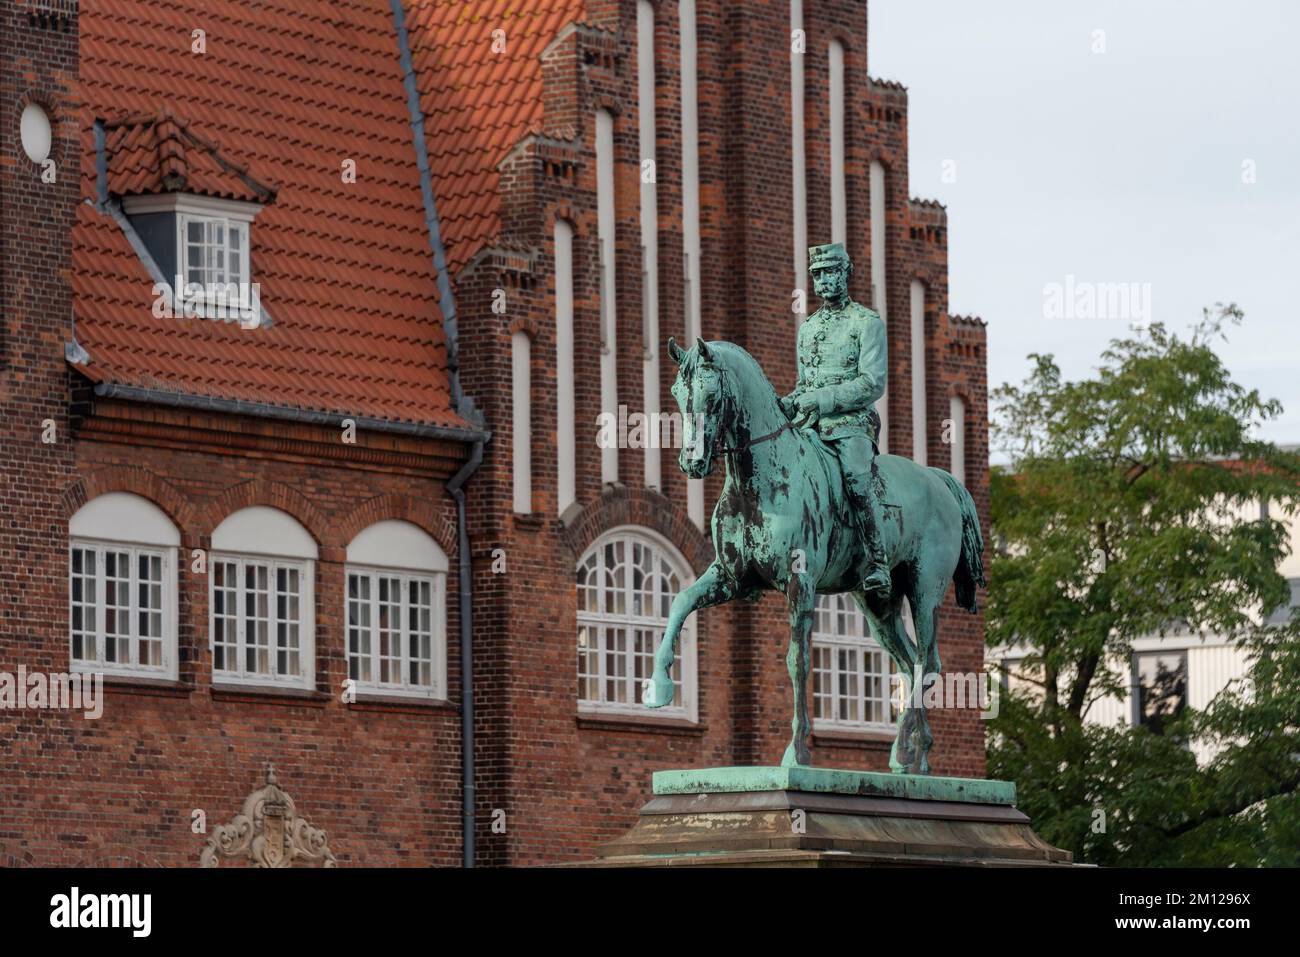 Equestrian statue of Christian IX, King of Denmark from 1863 until his death, Esbjerg, Syddanmark, Denmark Stock Photo